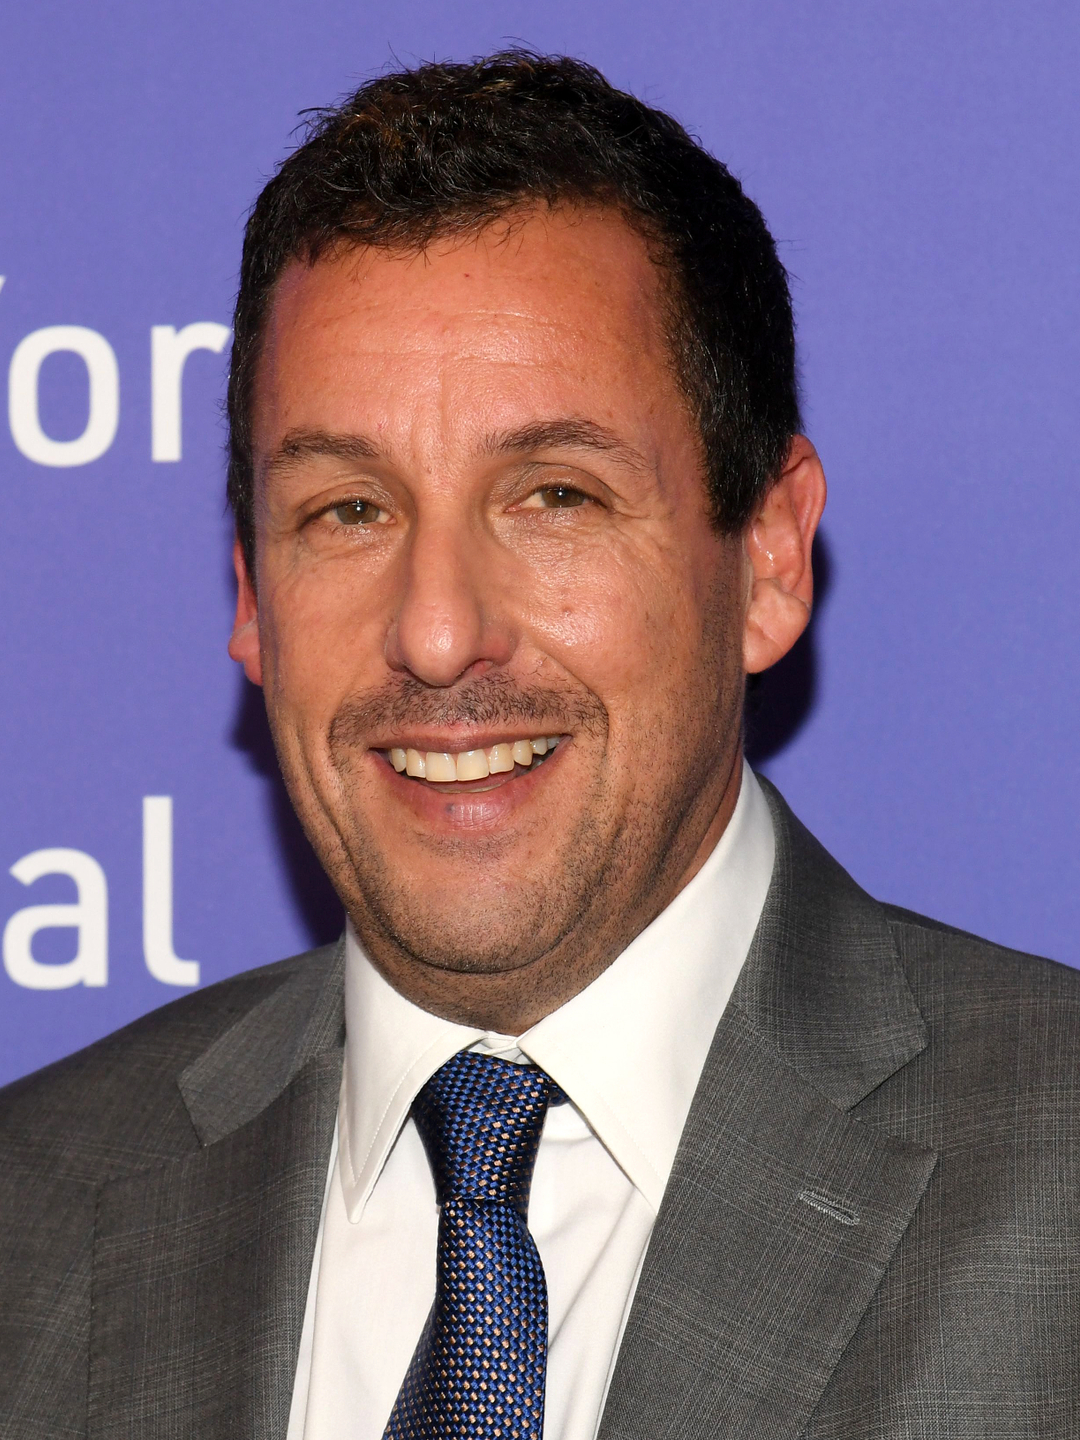 Adam Sandler who is his father